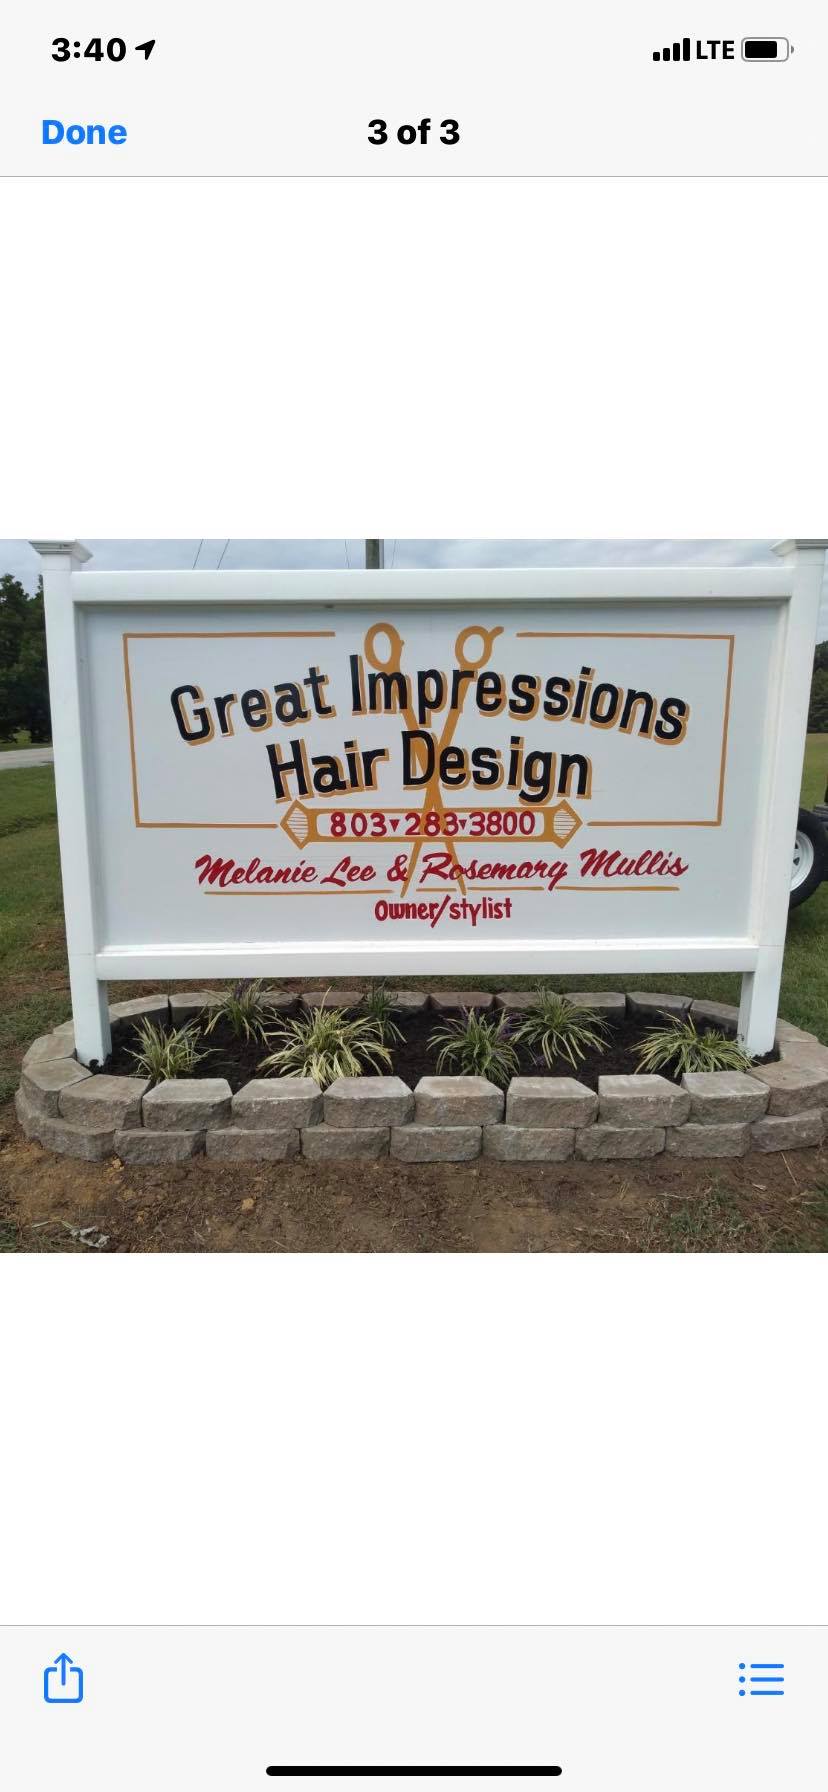 Great Impressions Hair Design